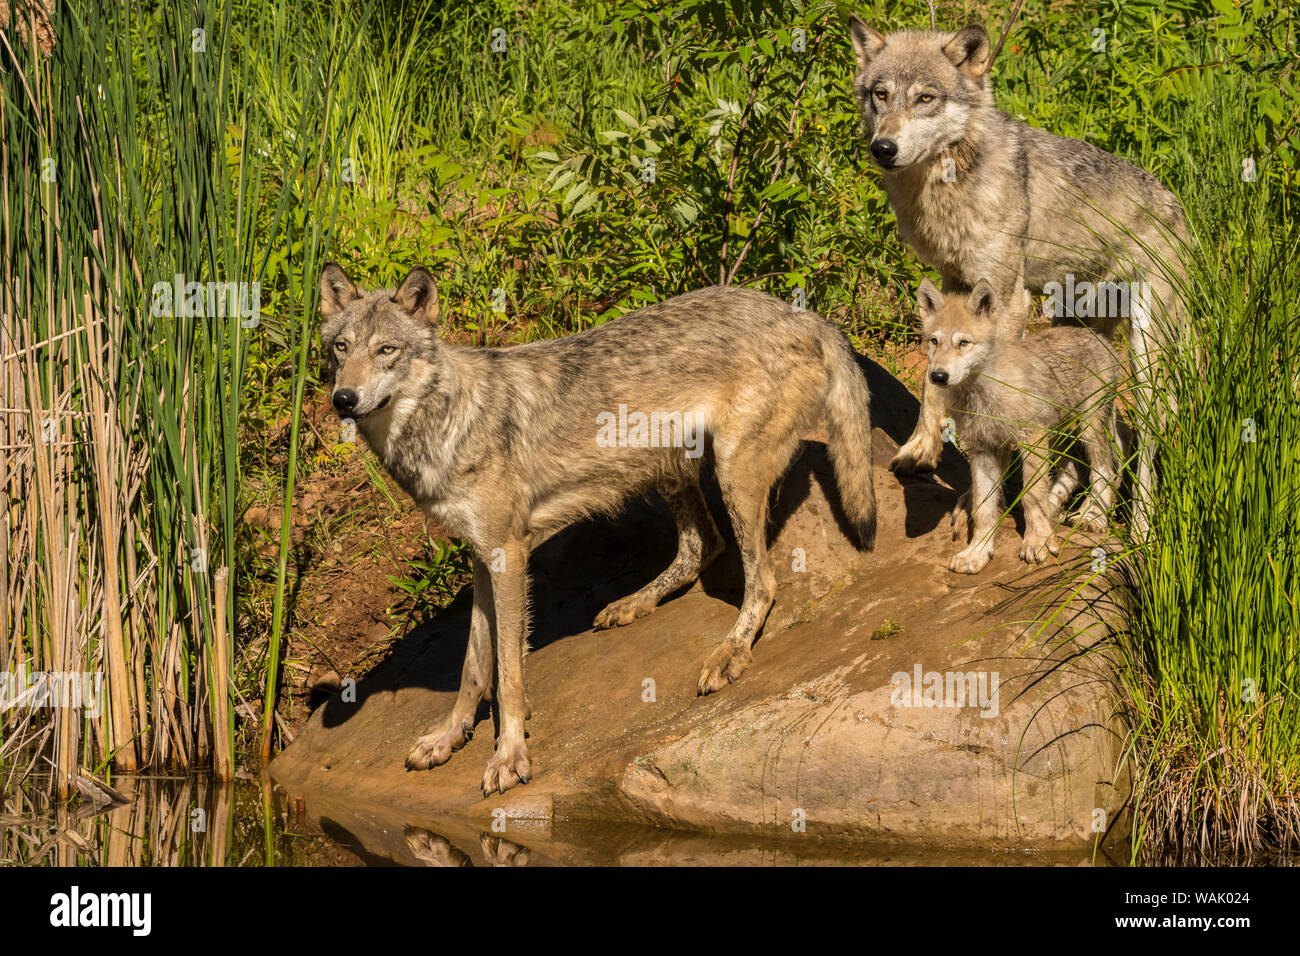 Pine County. Gray wolf family. Credit as: Cathy and Gordon Illg / Jaynes Gallery / DanitaDelimont.com Stock Photo